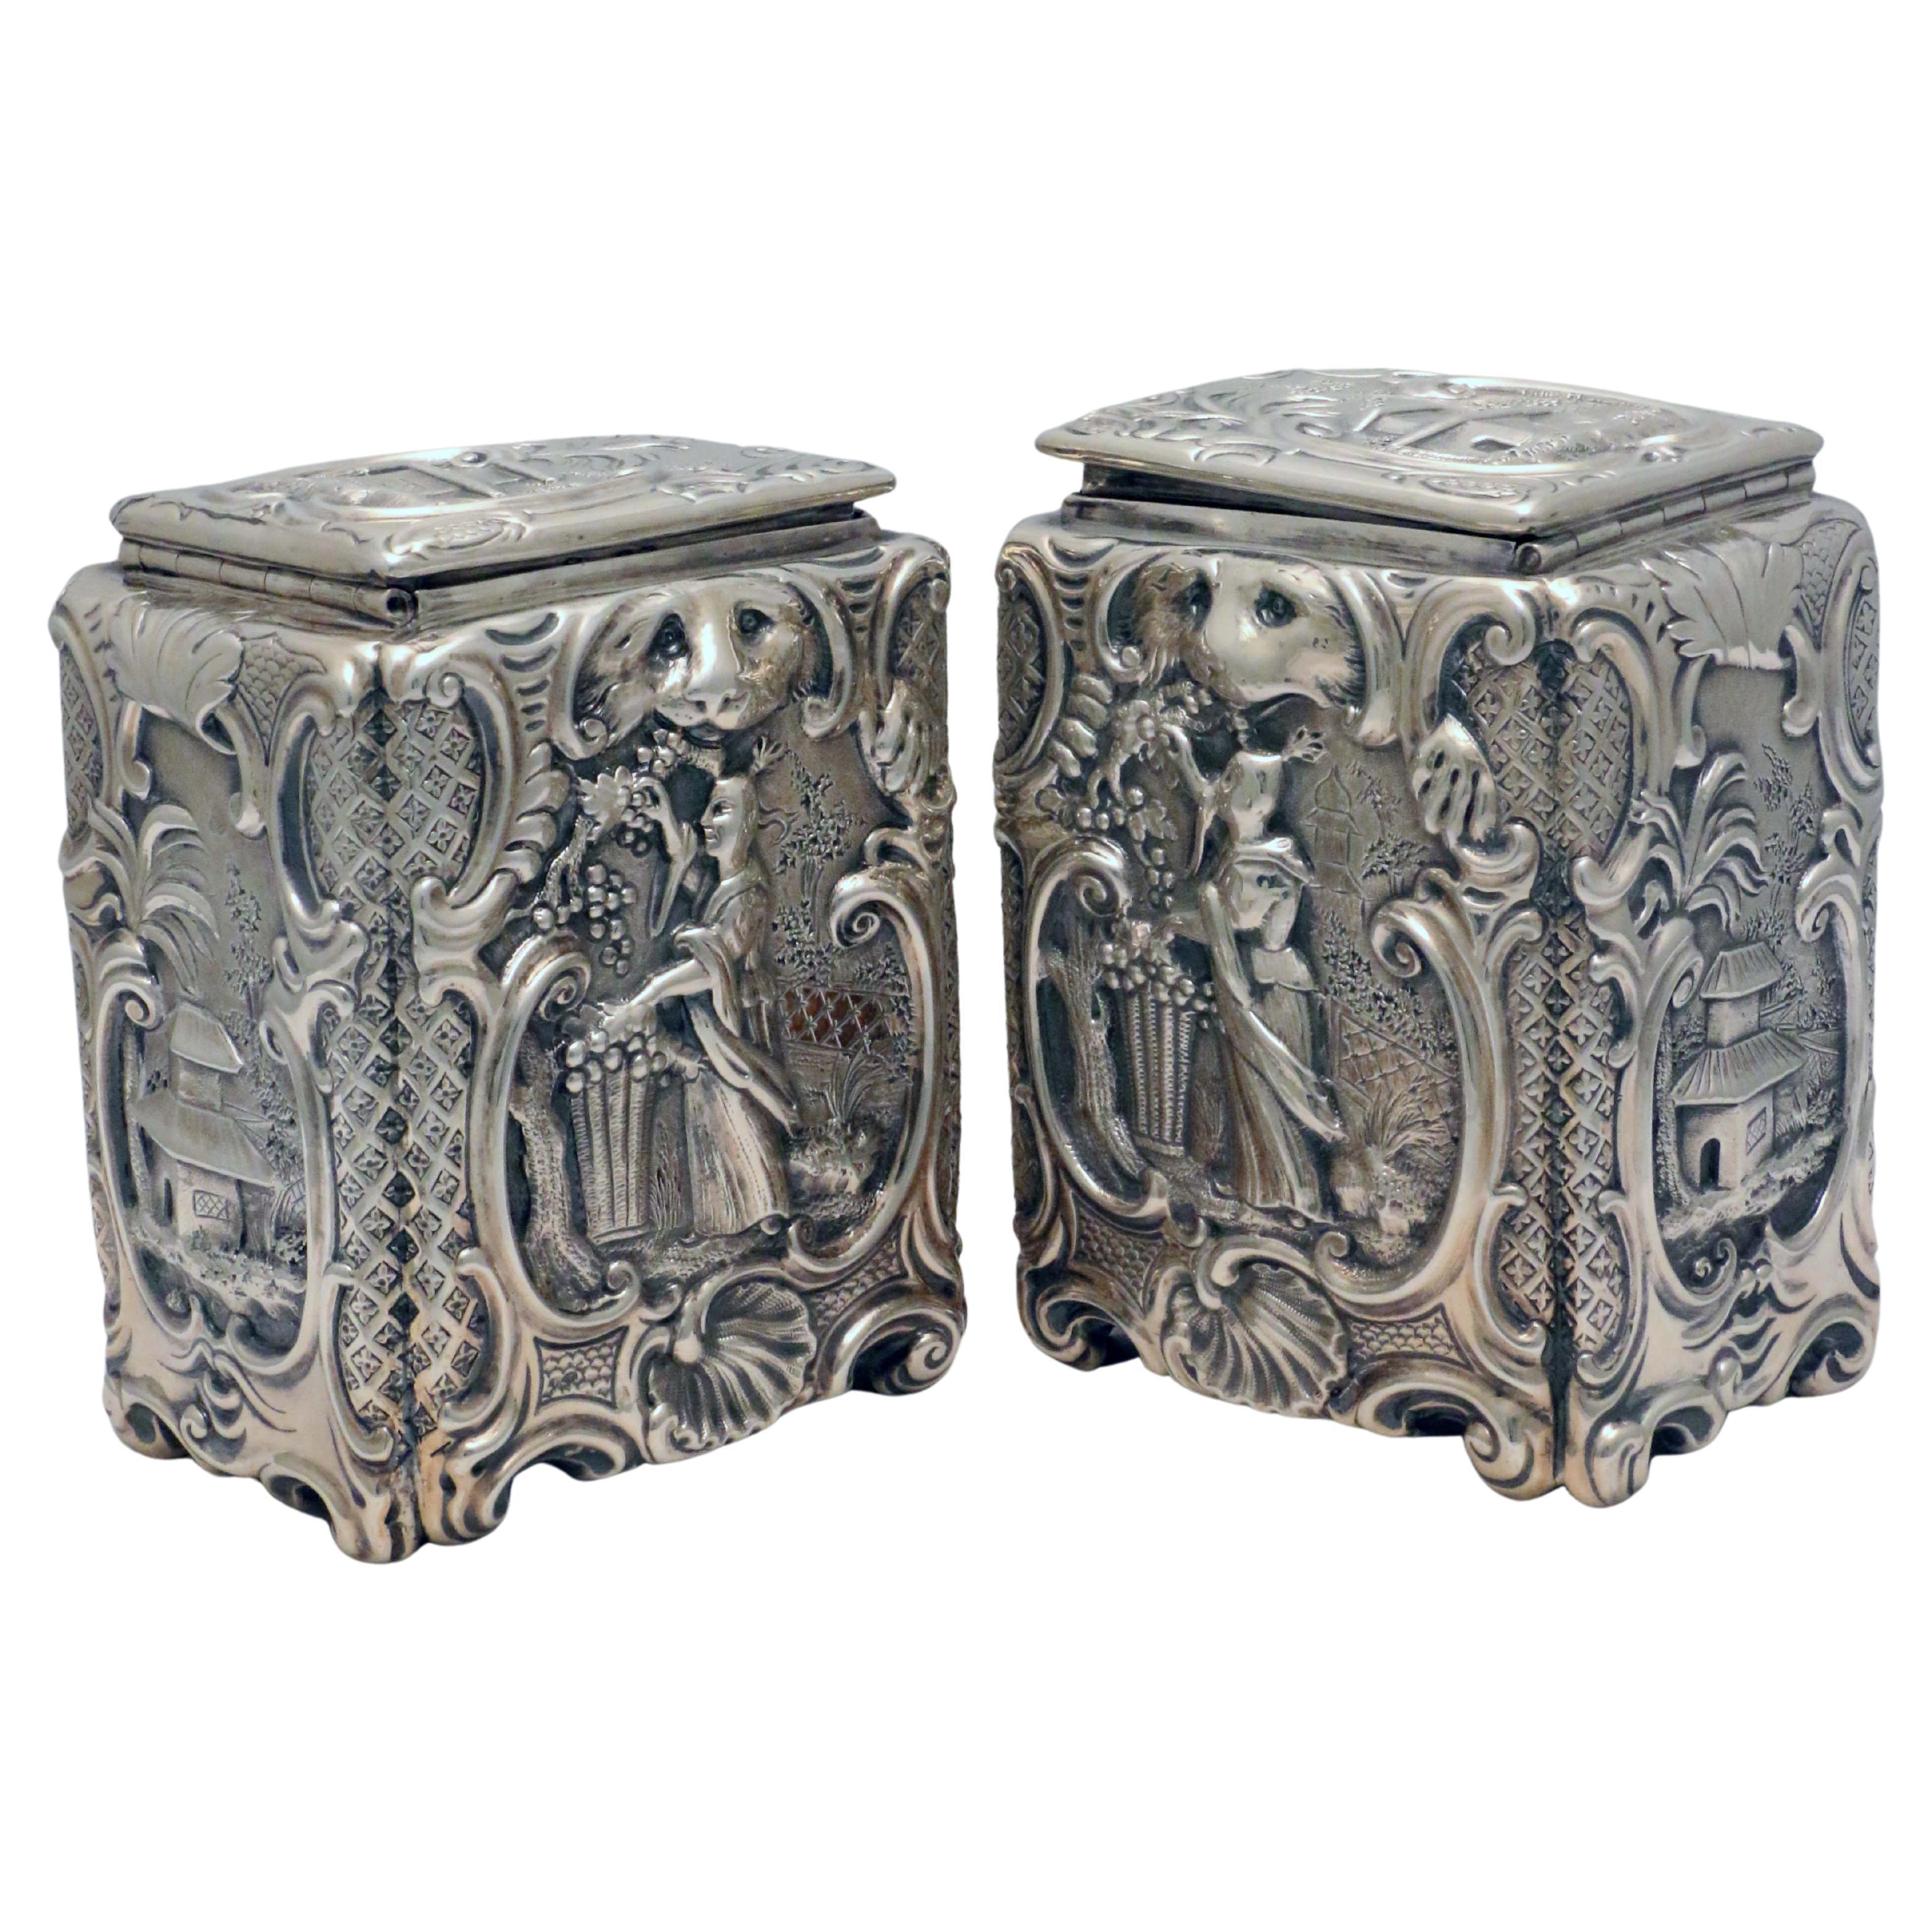 Pair of English Silver Chinoiserie Tea-Caddies, Mid 19th Century Roccoco Style For Sale